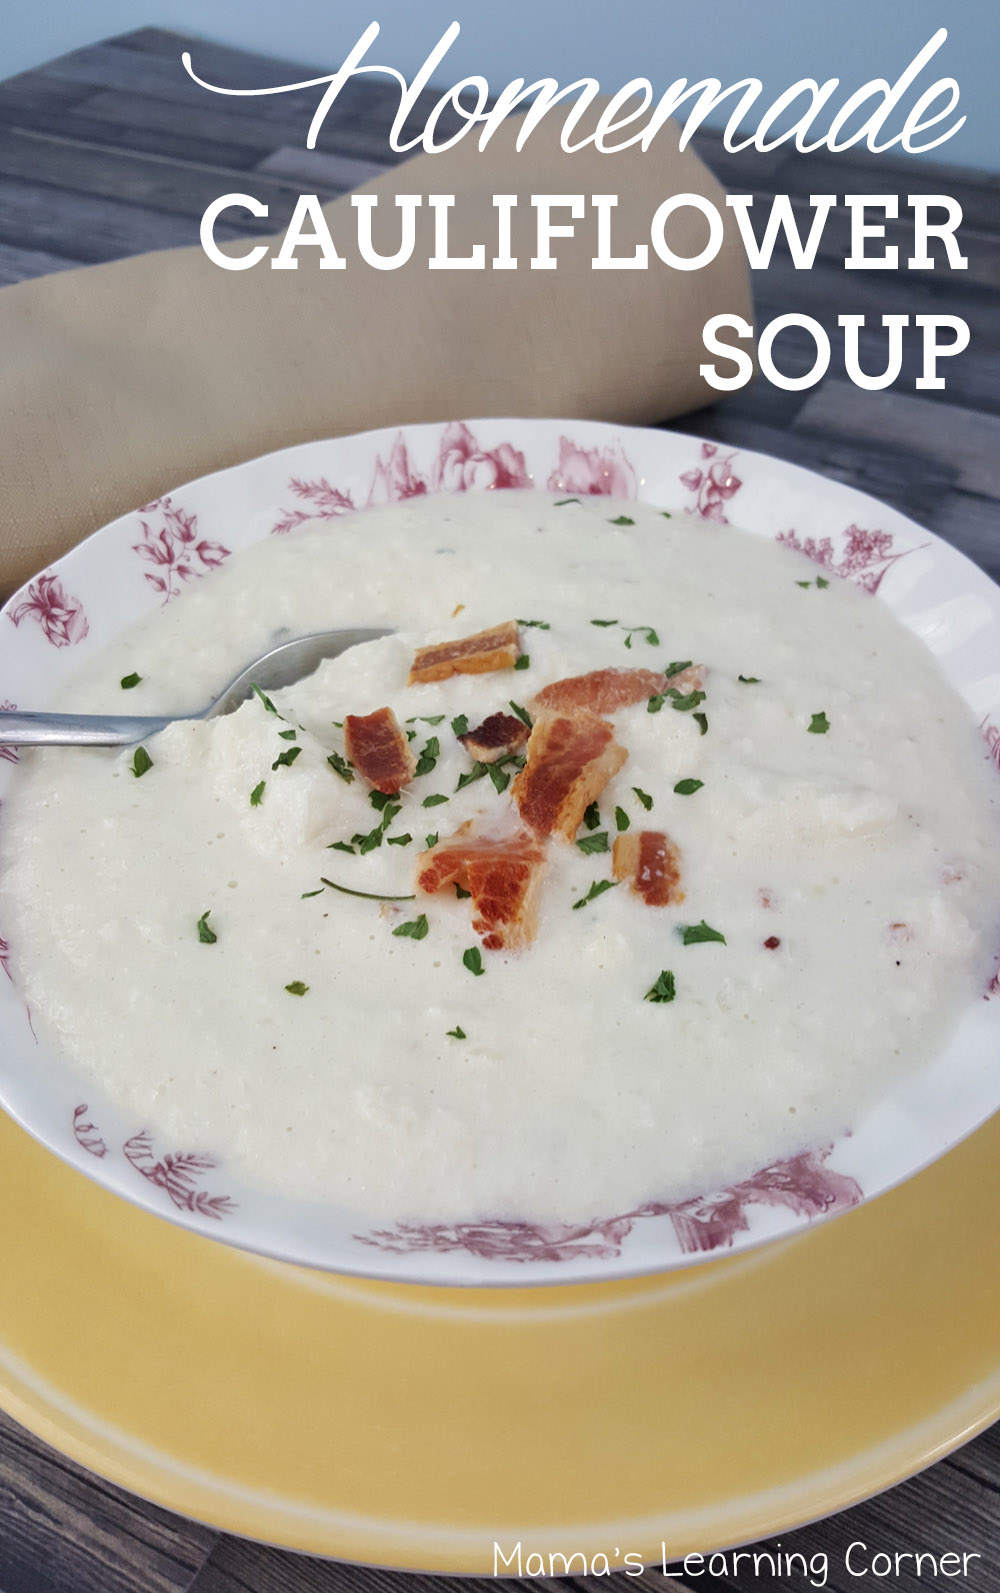 Cauliflower Soup with Cheese and Bacon